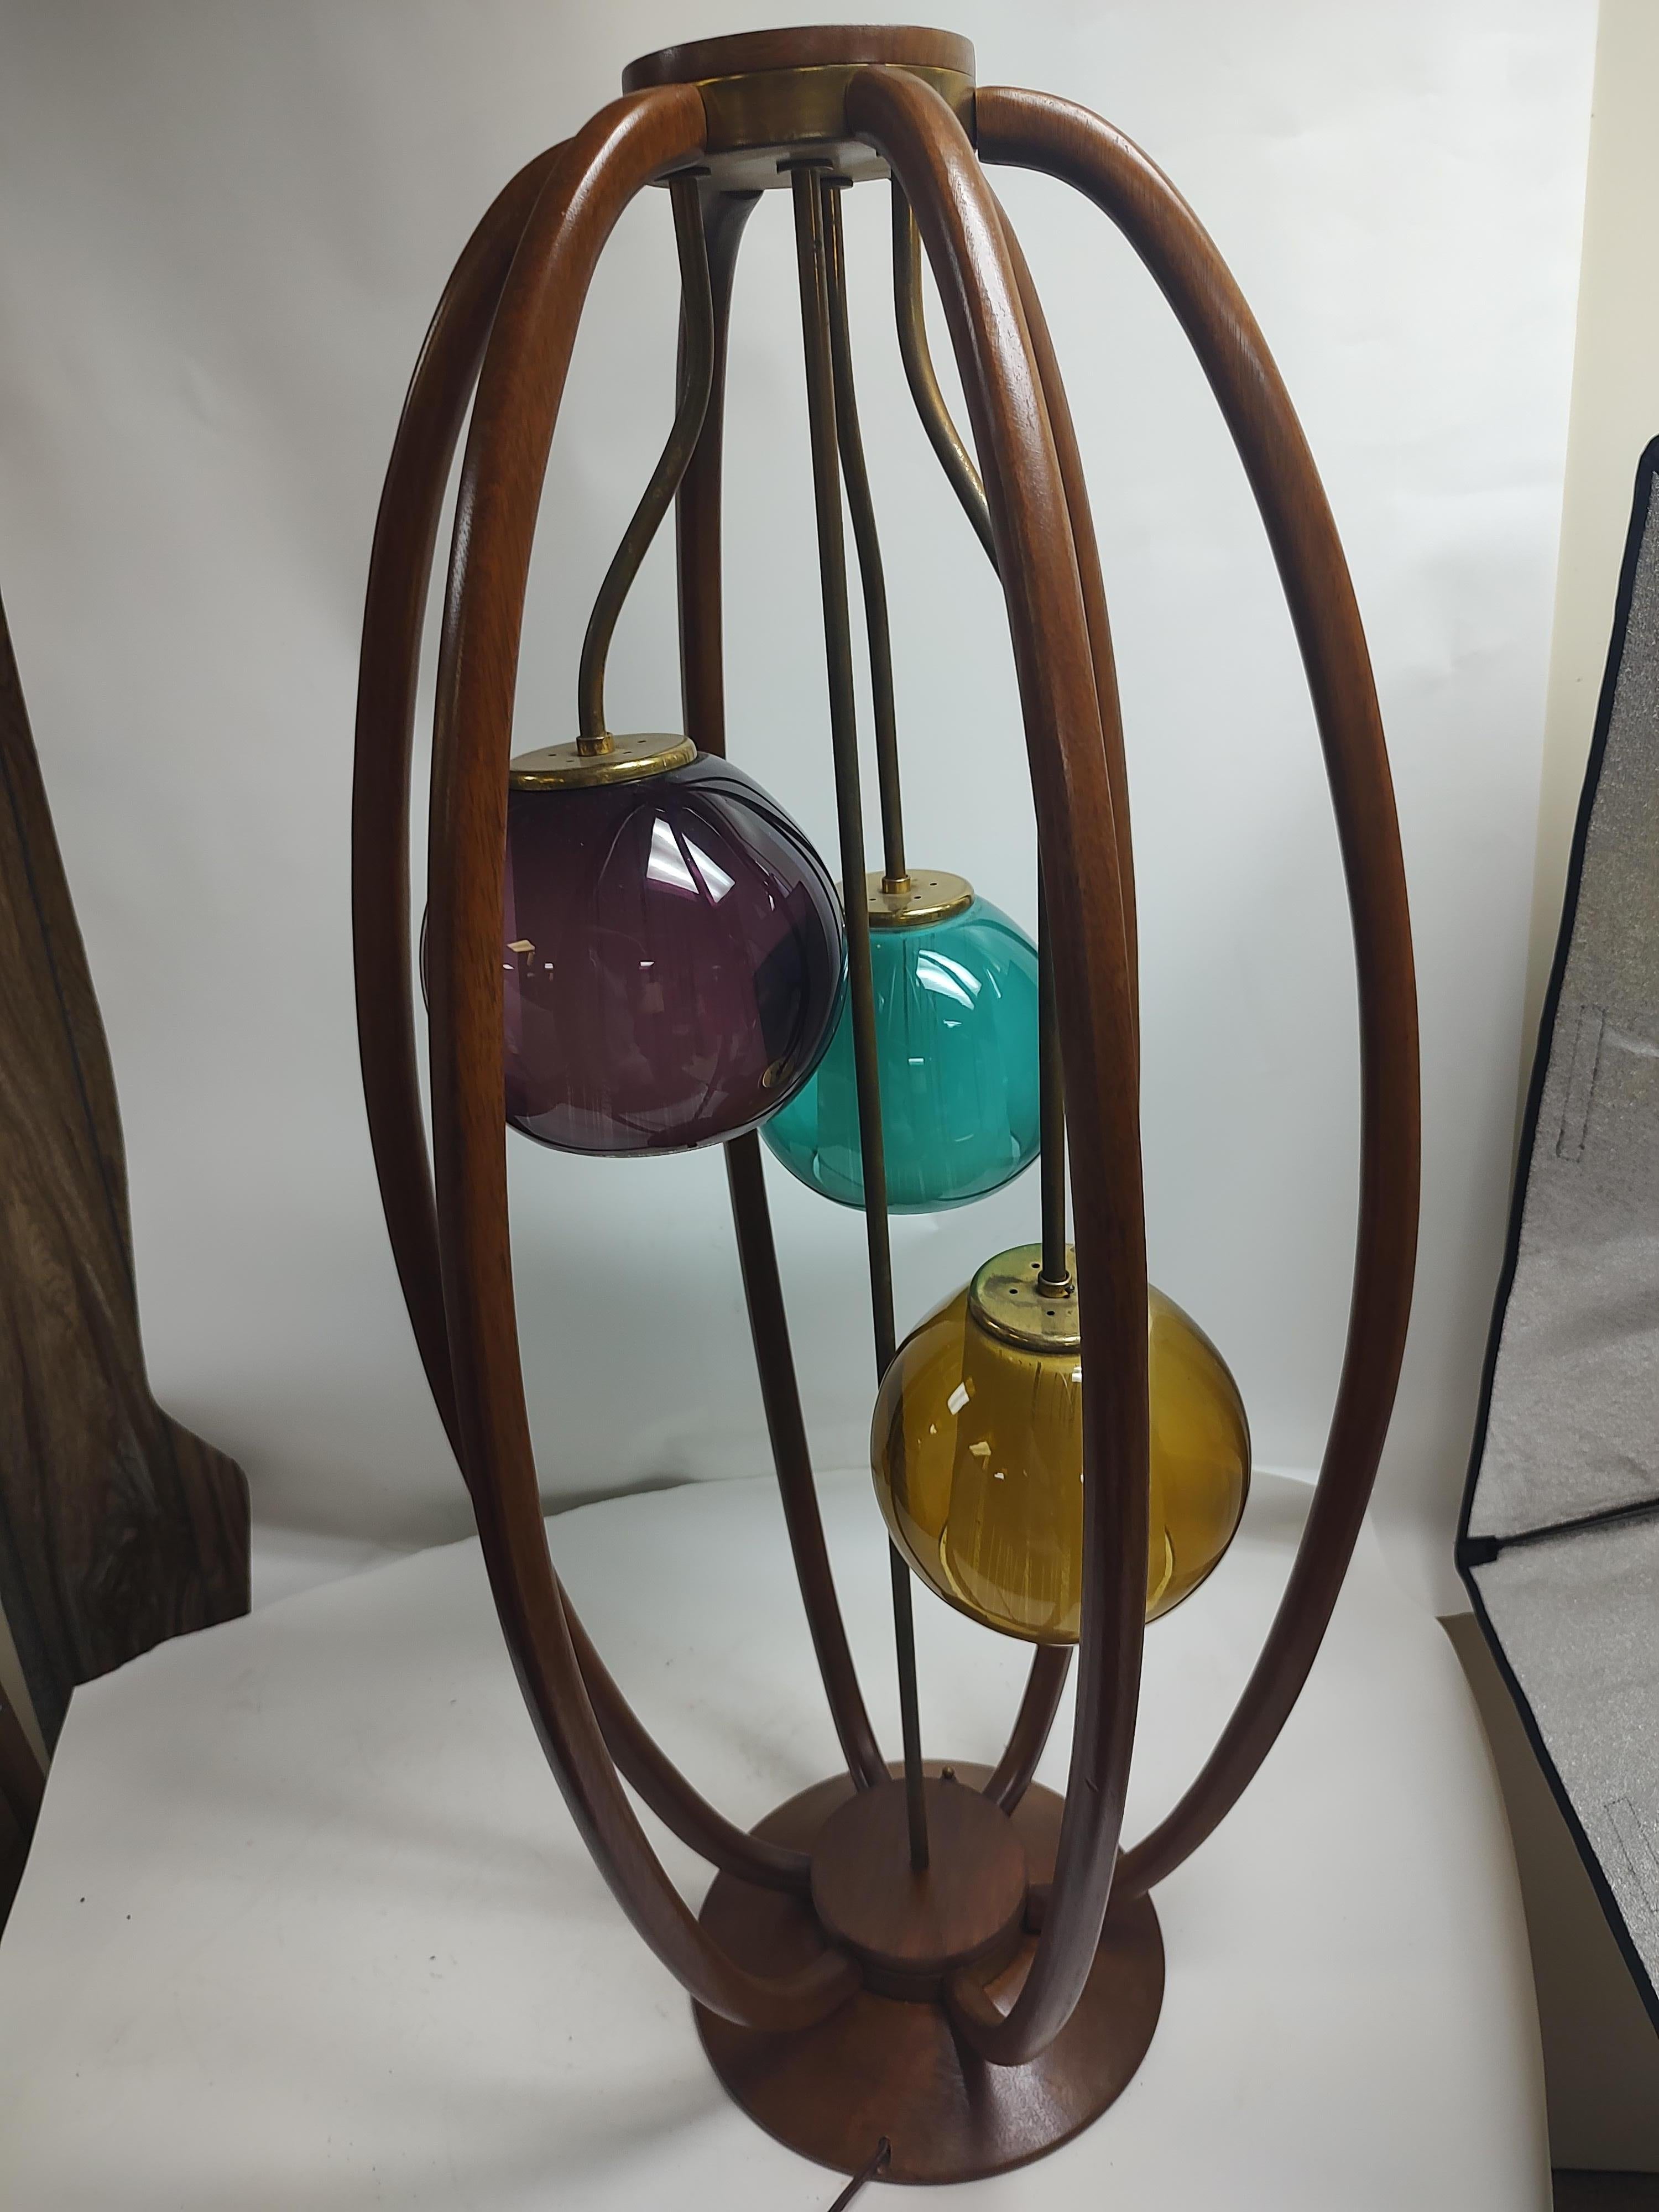 Fabulous 3 light with a 3way switch, one two or all 3 lights depending on the mood. Amethyst, yellow and green colored outer shades with white glass with a strie inside the colored glass shades. In excellent vintage condition glass is perfect. Tall